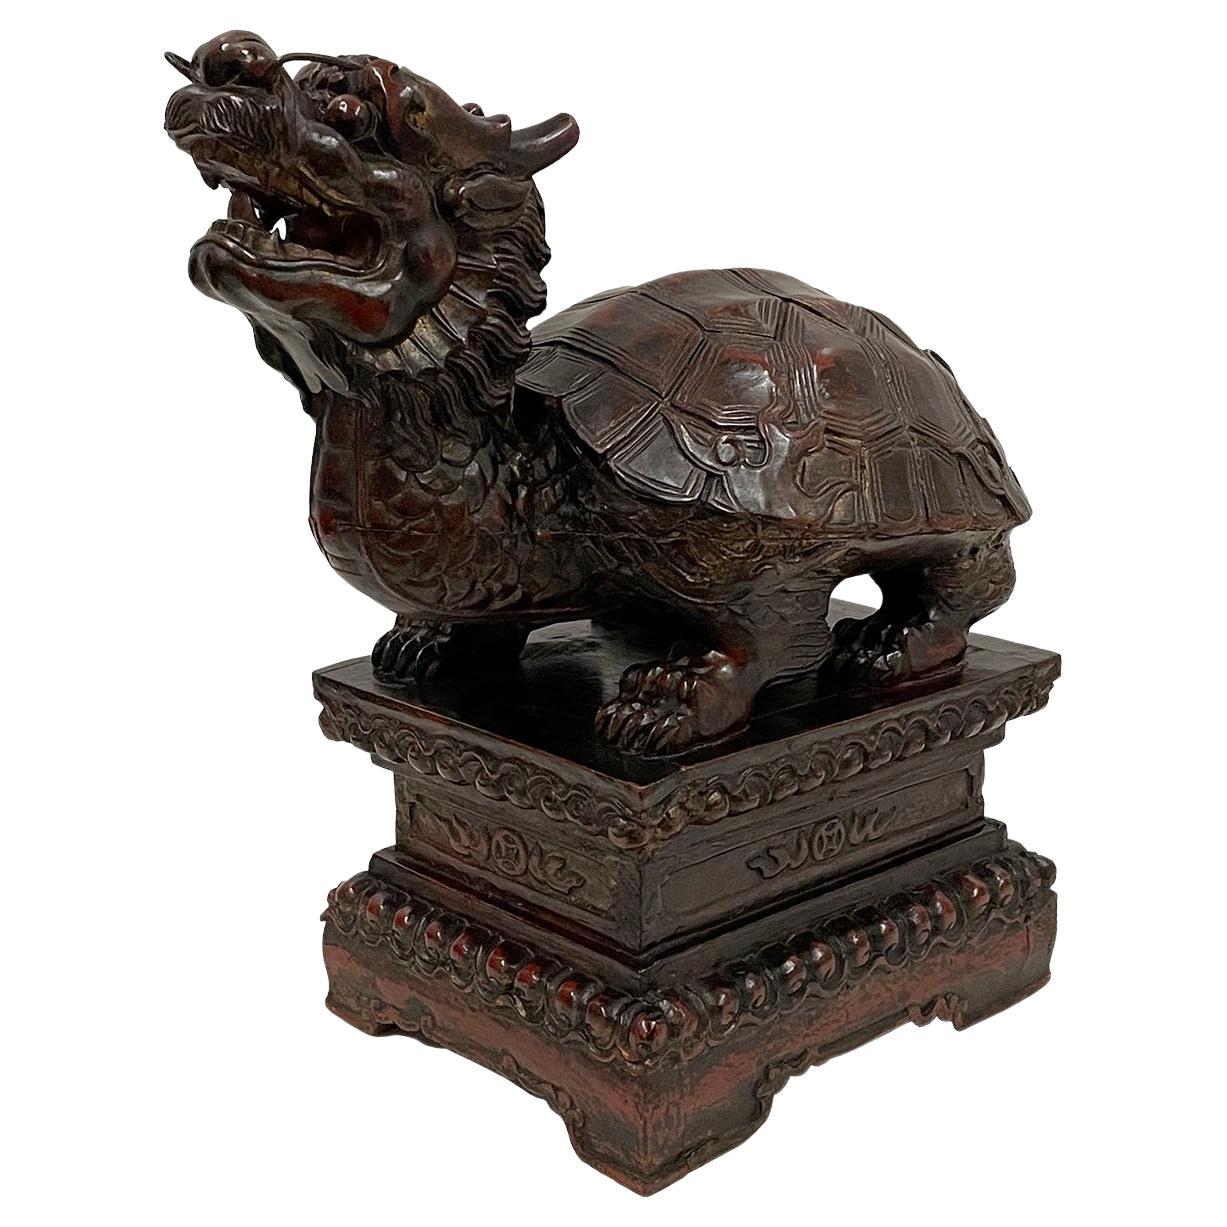 Early 20th Century Chinese Wooden Carved Dragon Turtle Sculpture